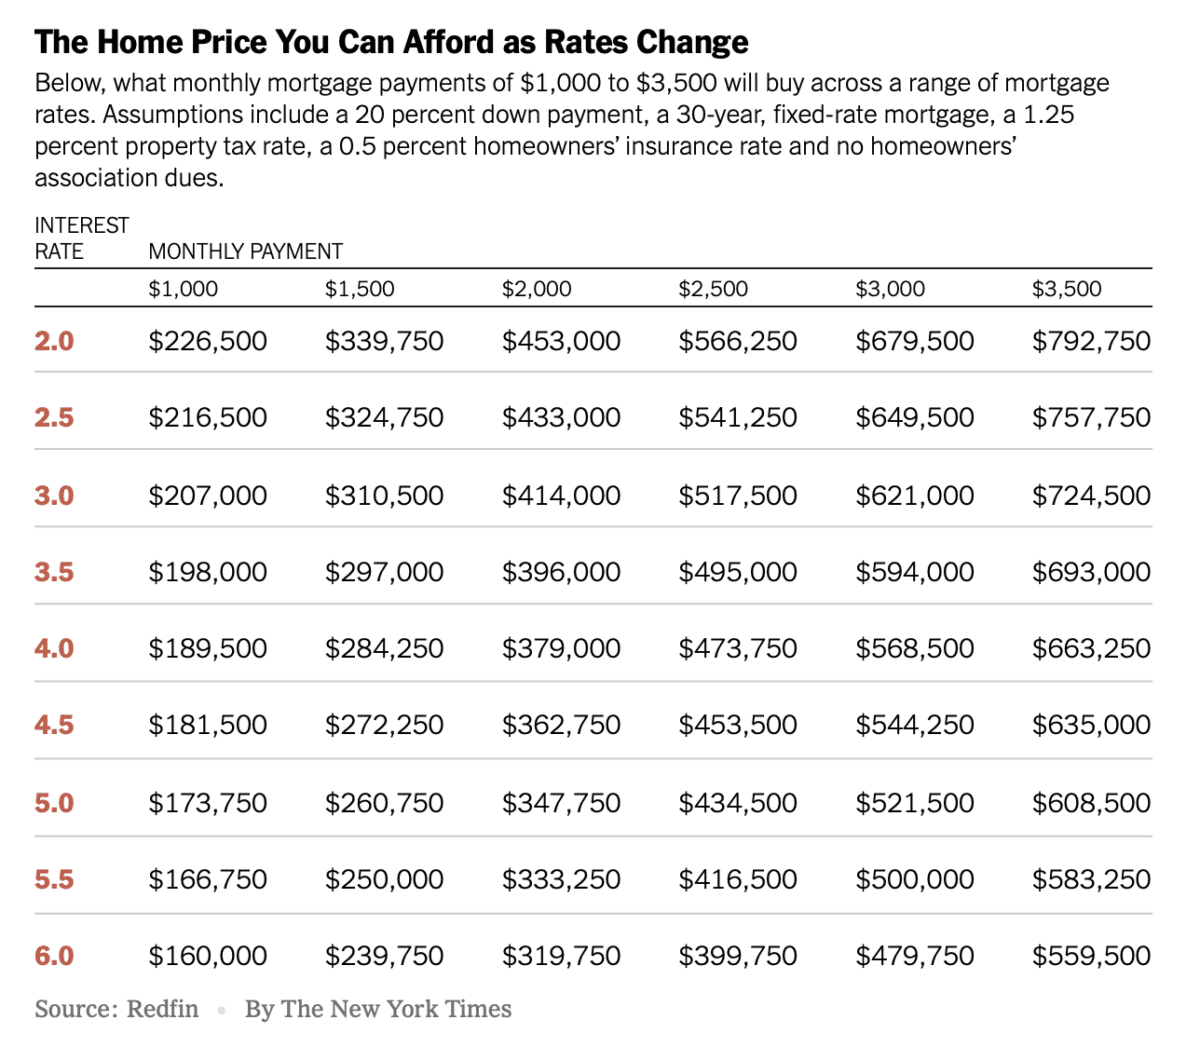 chart from the NYT showing the hugse change in what a buyer can afford between a 2% and 6% interest rate